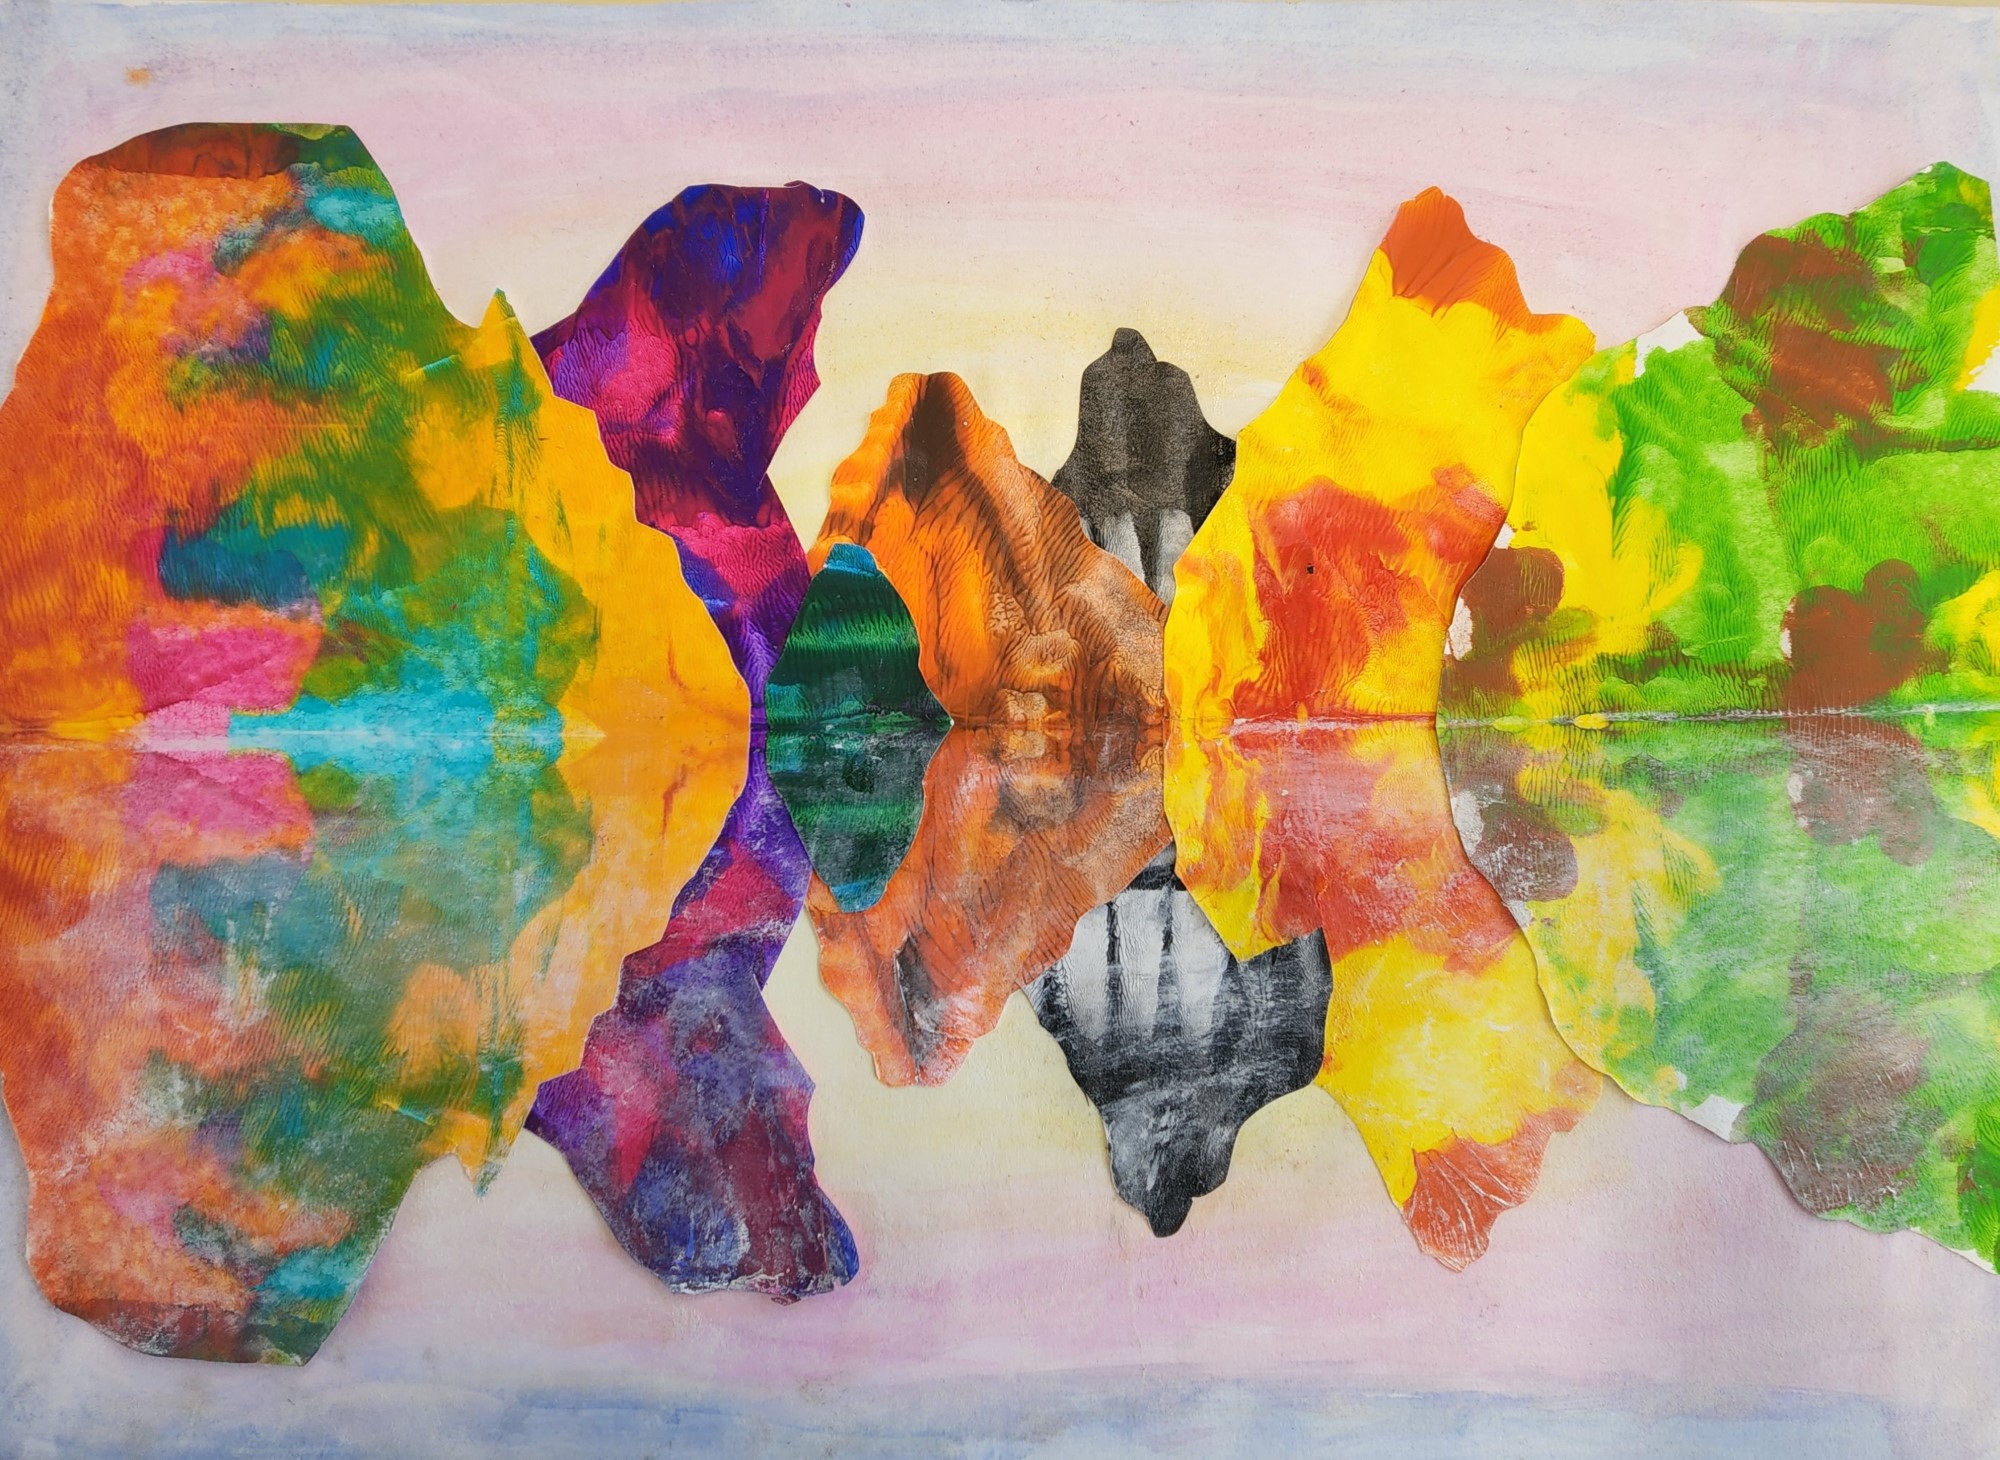 Student artwork - reflections in the lake